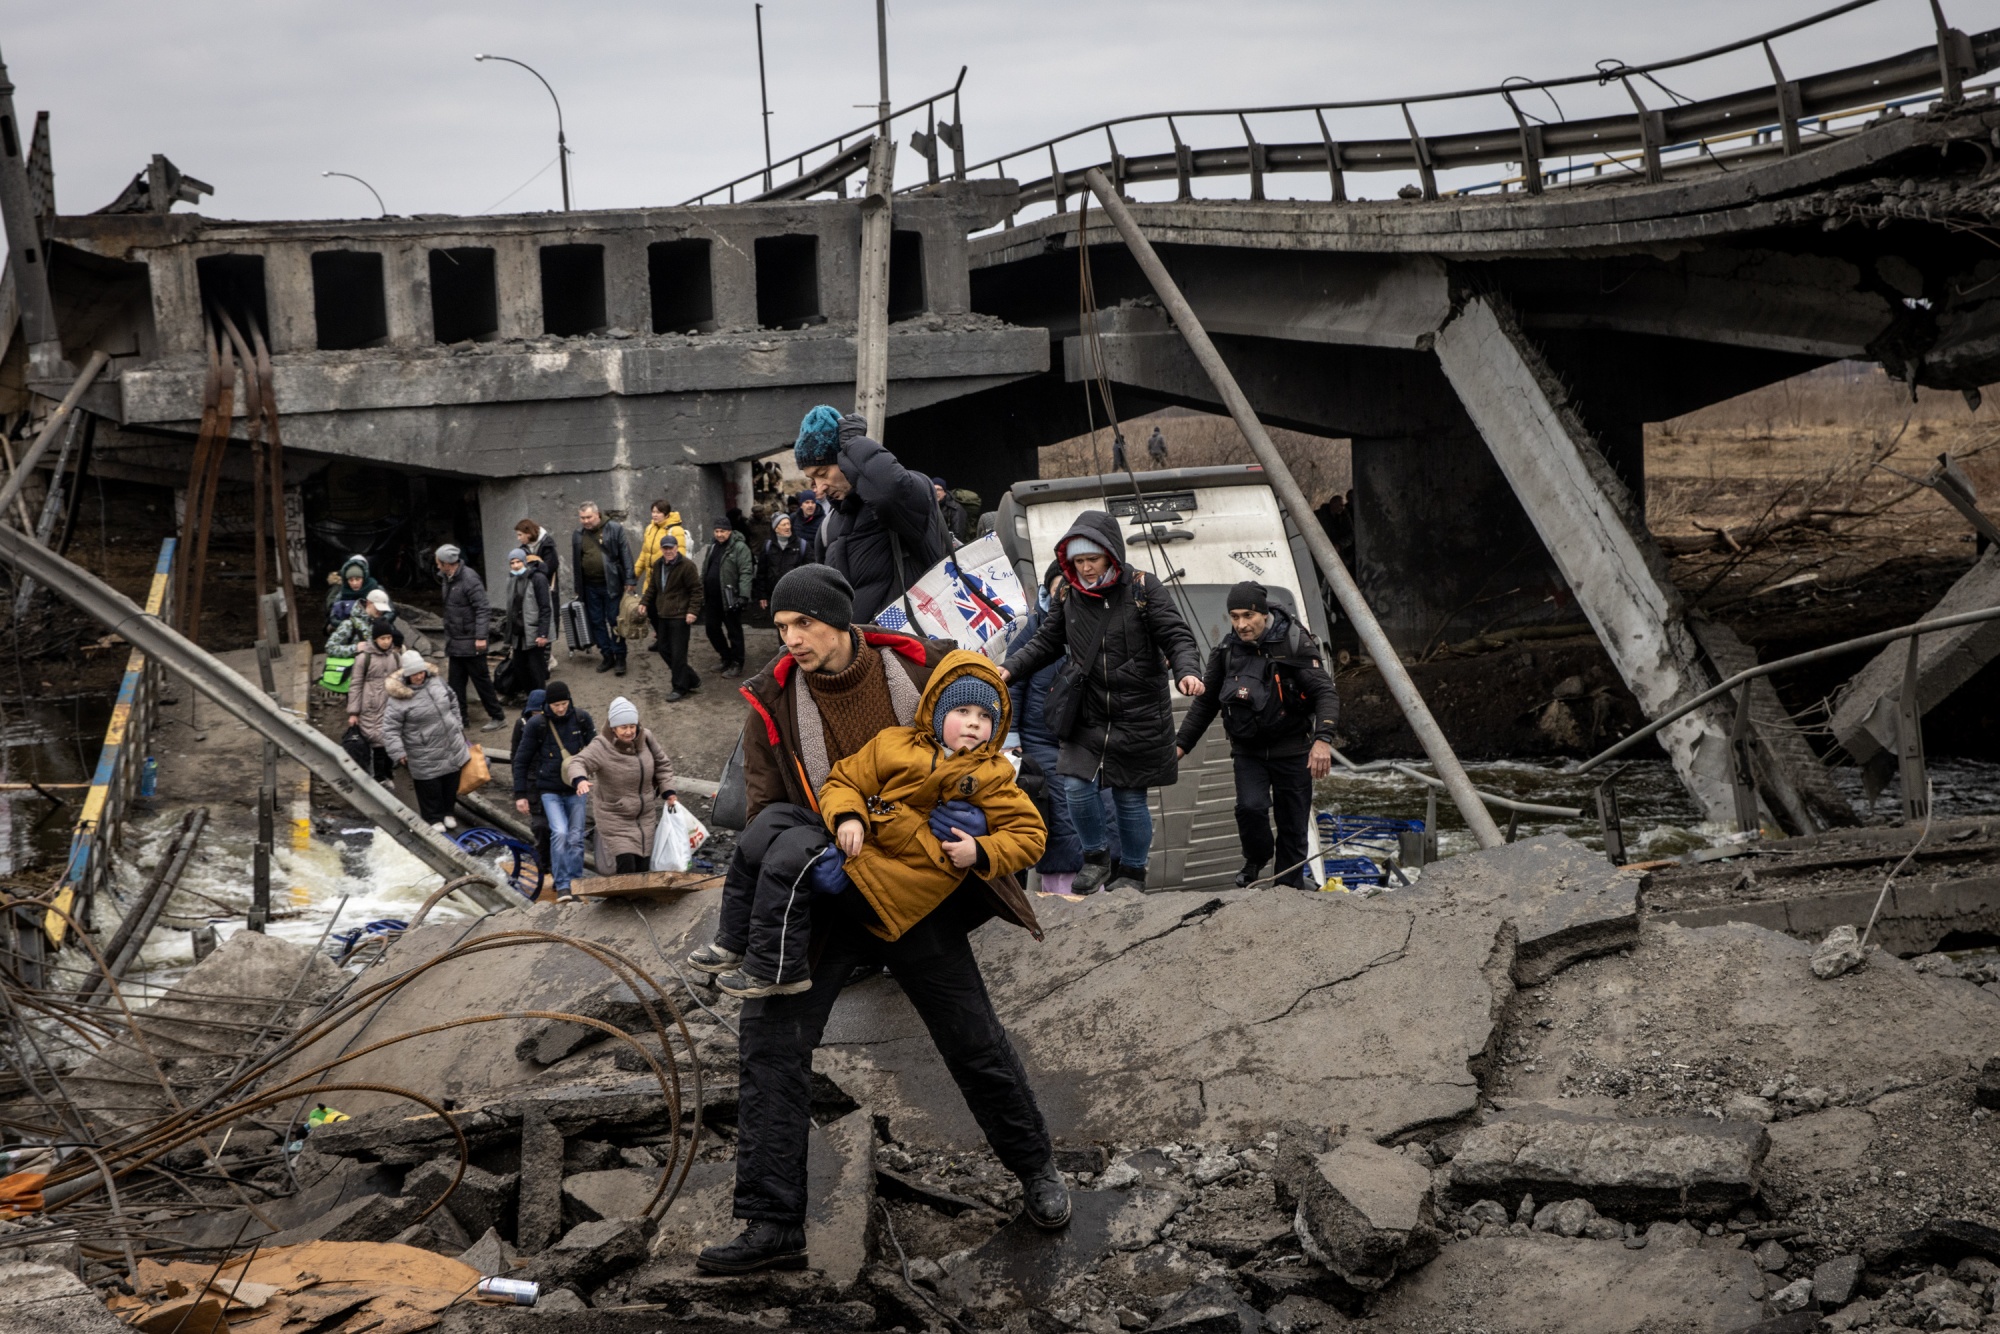 Residents of Irpin, Ukraine fled heavy fighting as Russian forces approached on March 7.